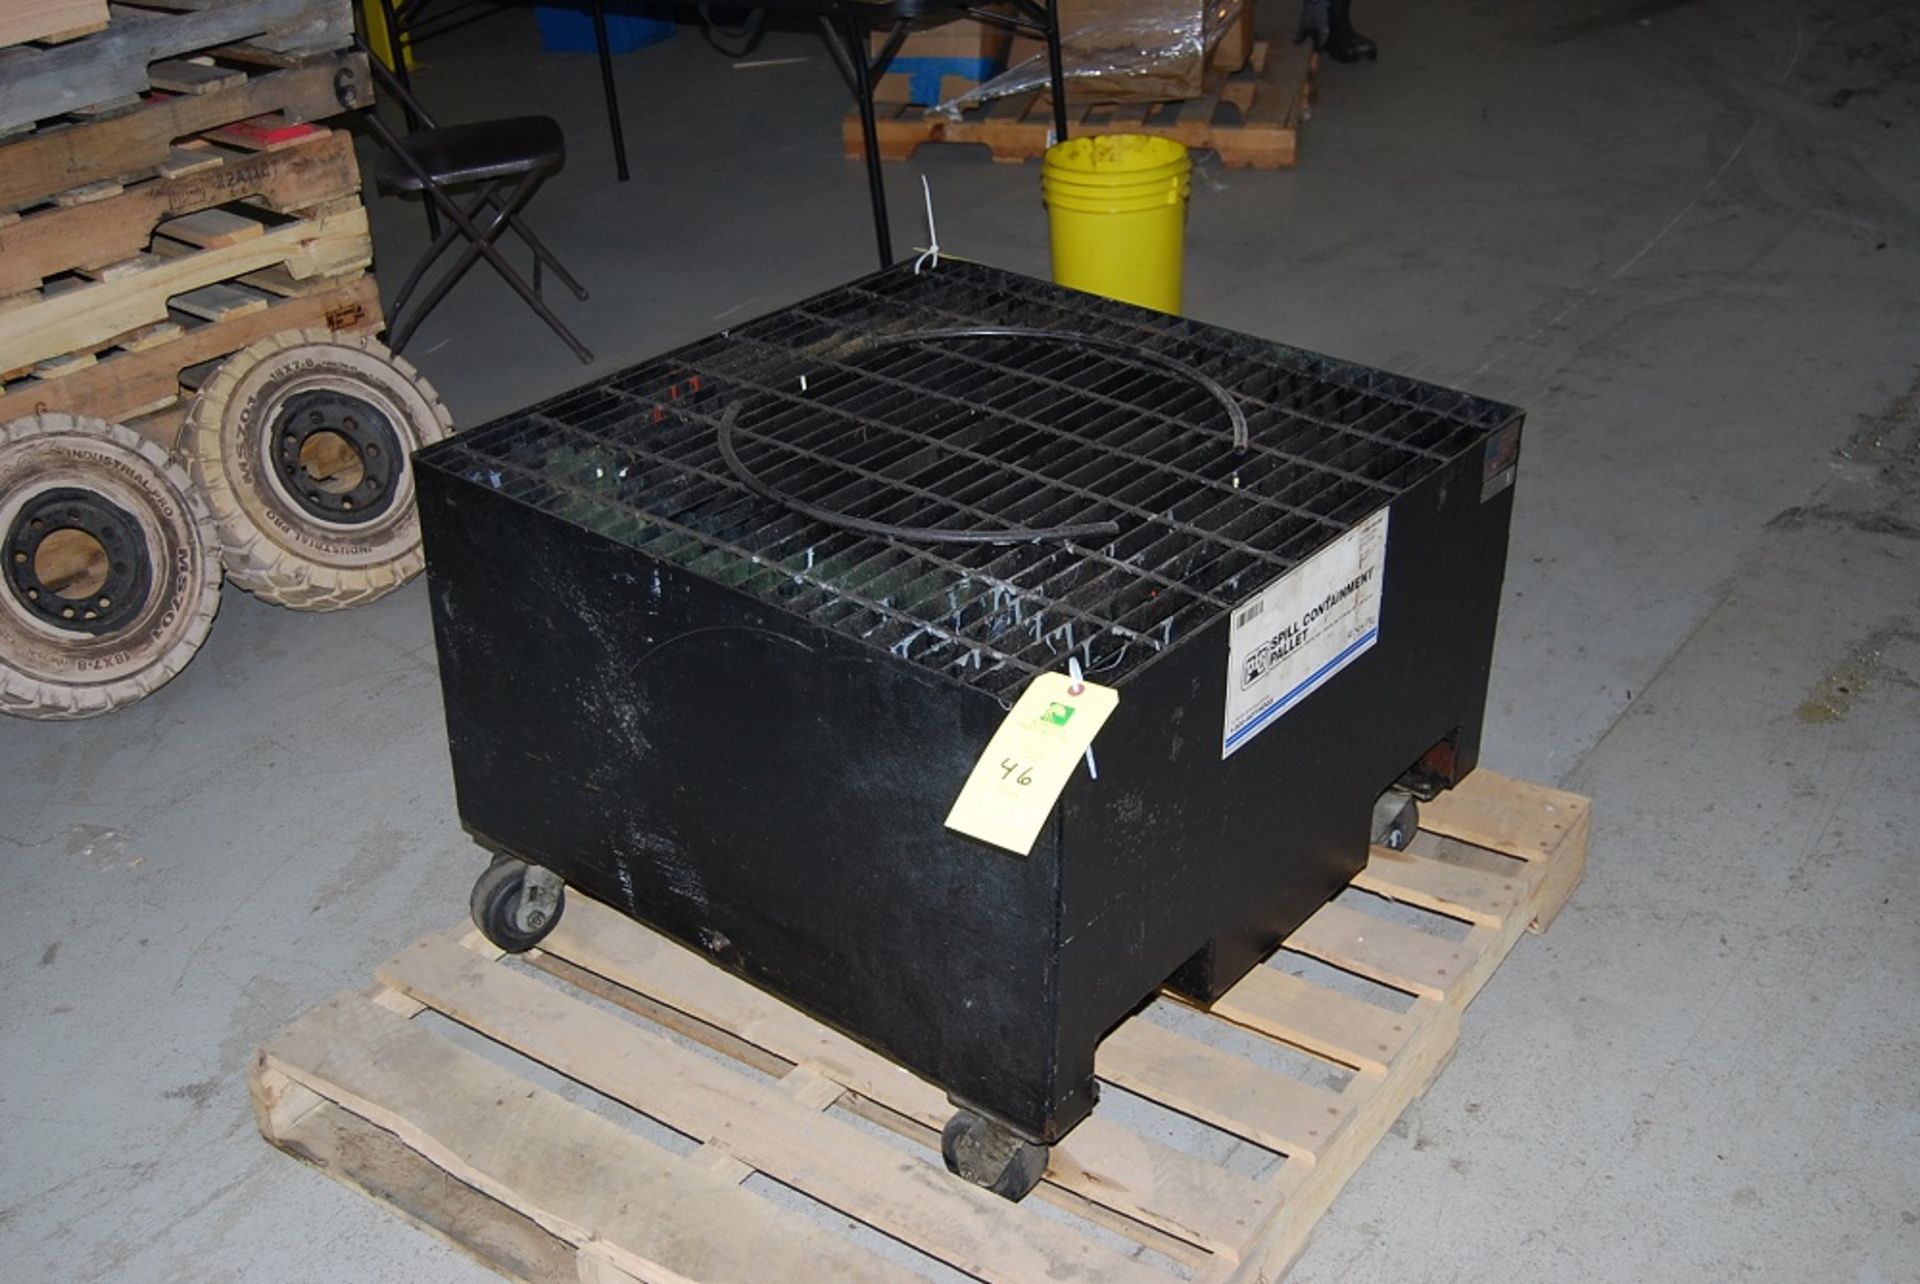 New Pig Spill Containment Pallet, Foot Print: 32.5" x 32.5" x 23" tall on casters - Image 4 of 6